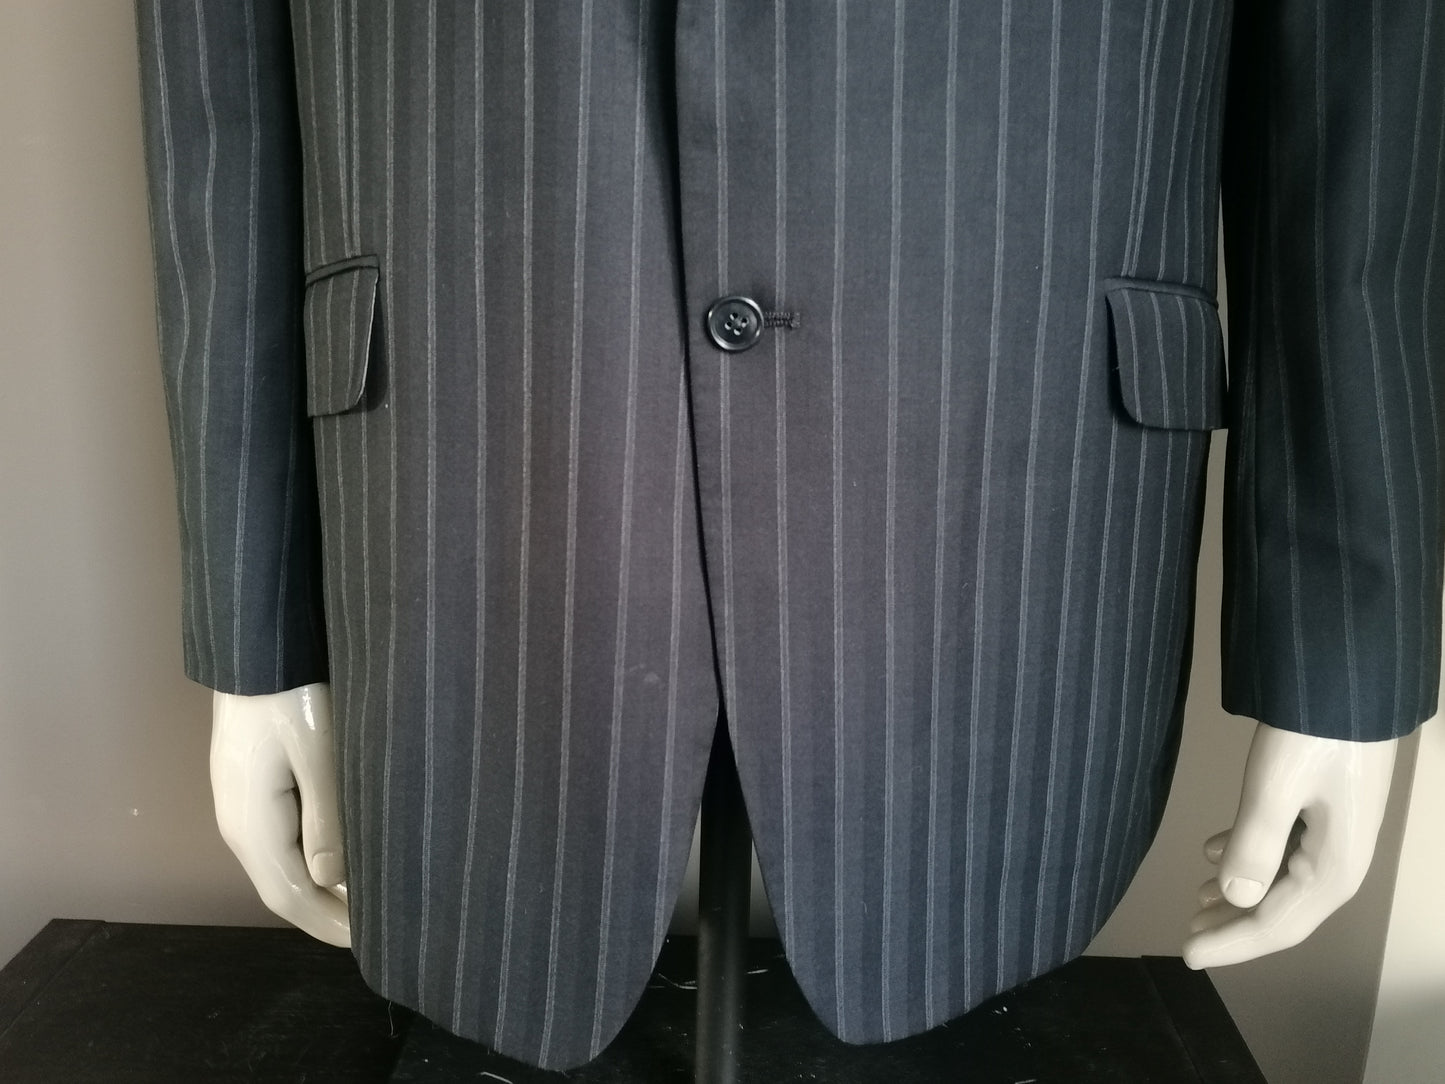 Autograph (Marks & Spencer) jacket. Black and white striped. Size 56 / XL.